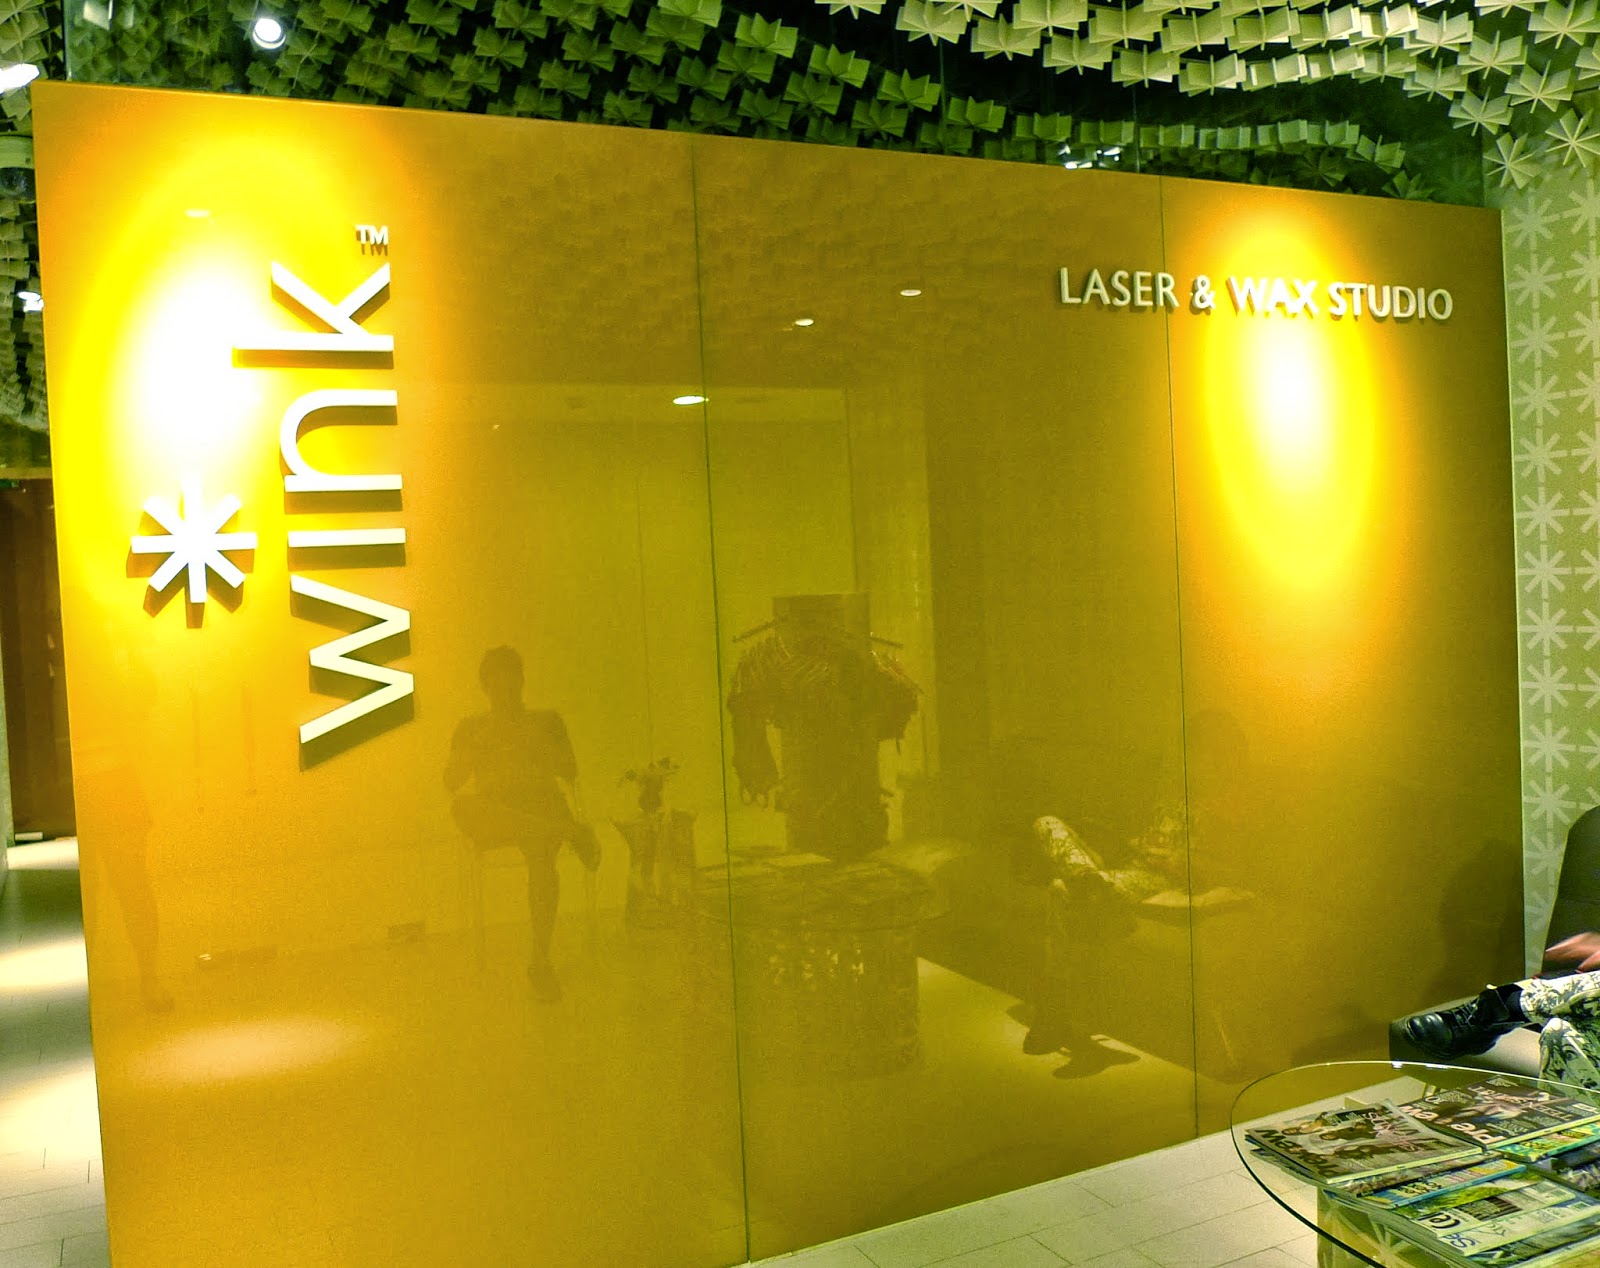 Brazilian Laser Hair Removal At Wink Laser And Wax Studio Part I The Beauty Junkee